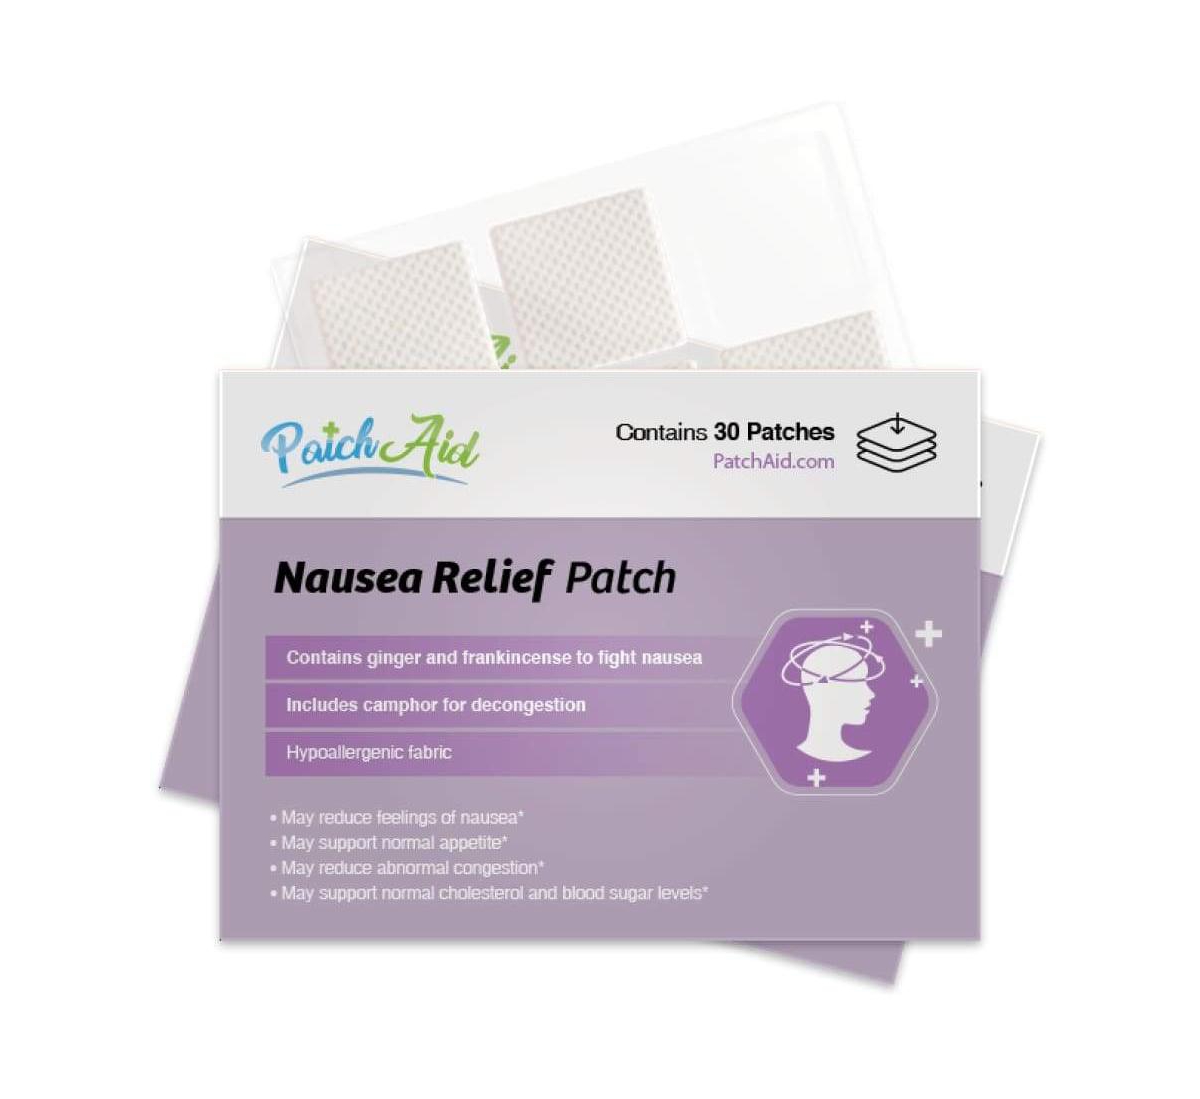 Nausea Relief Patch by PatchAid (30-Day Supply) - White